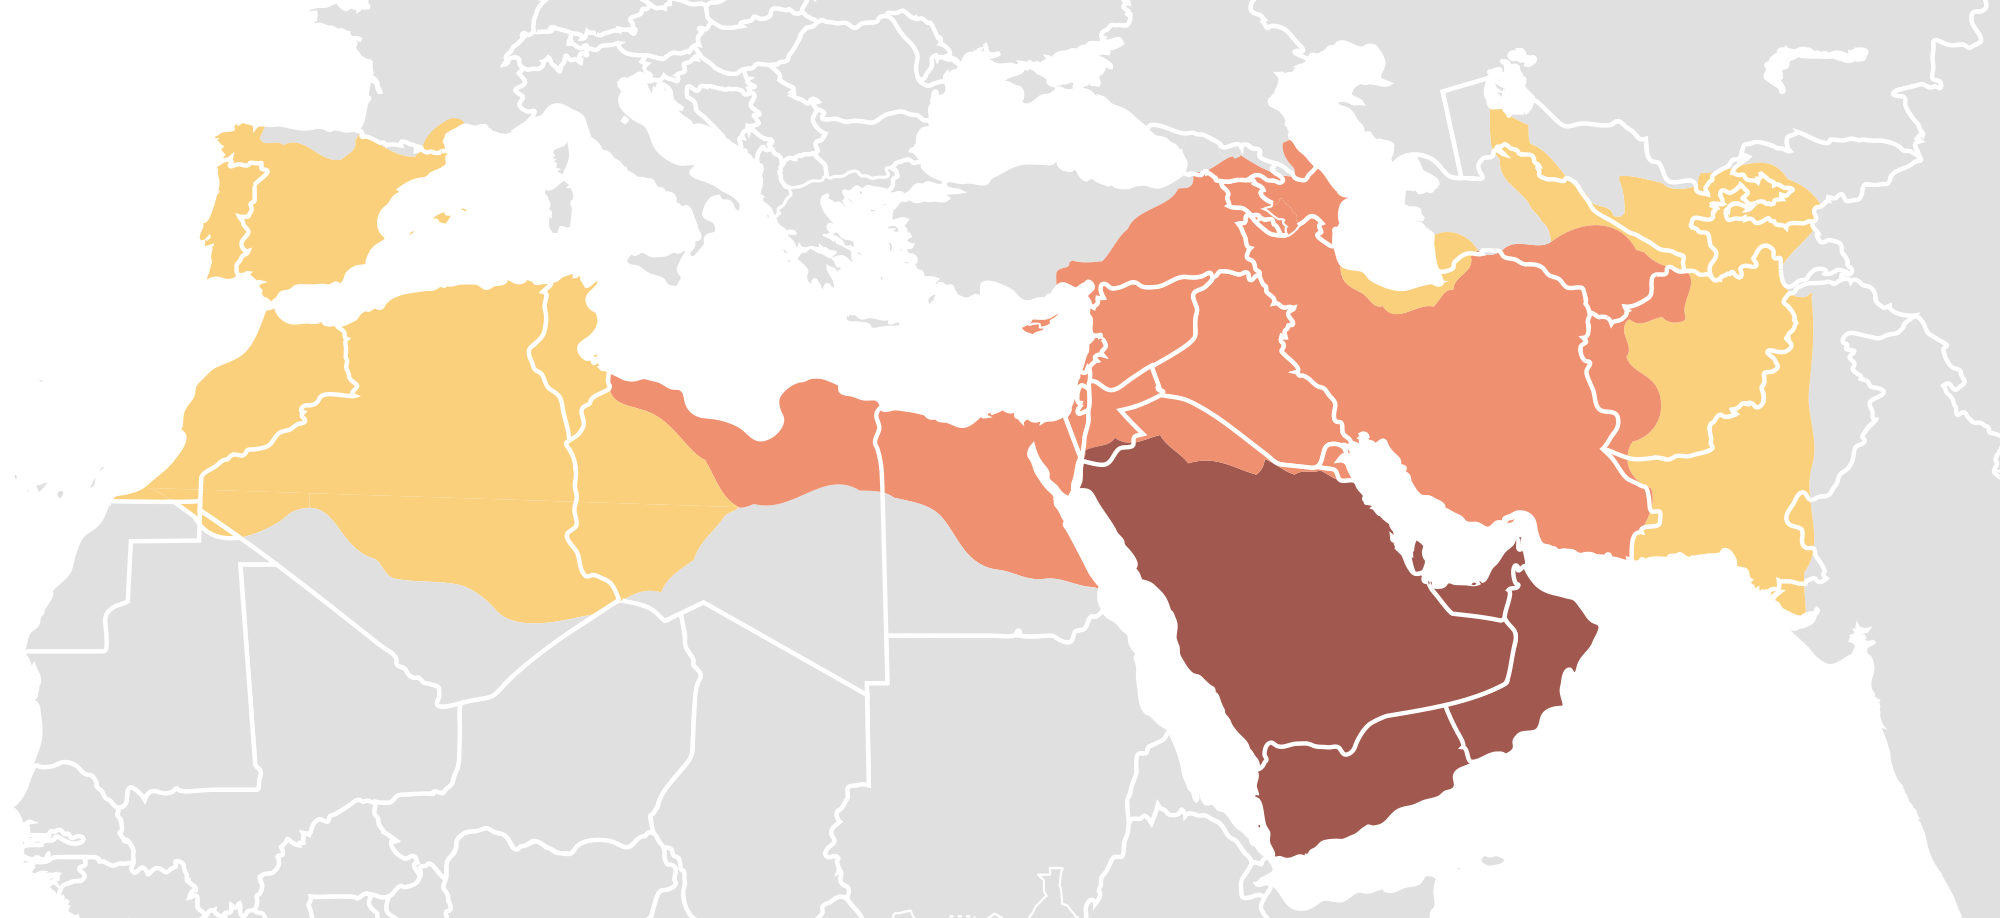 map_of_expansion_of_caliphate_svg.png